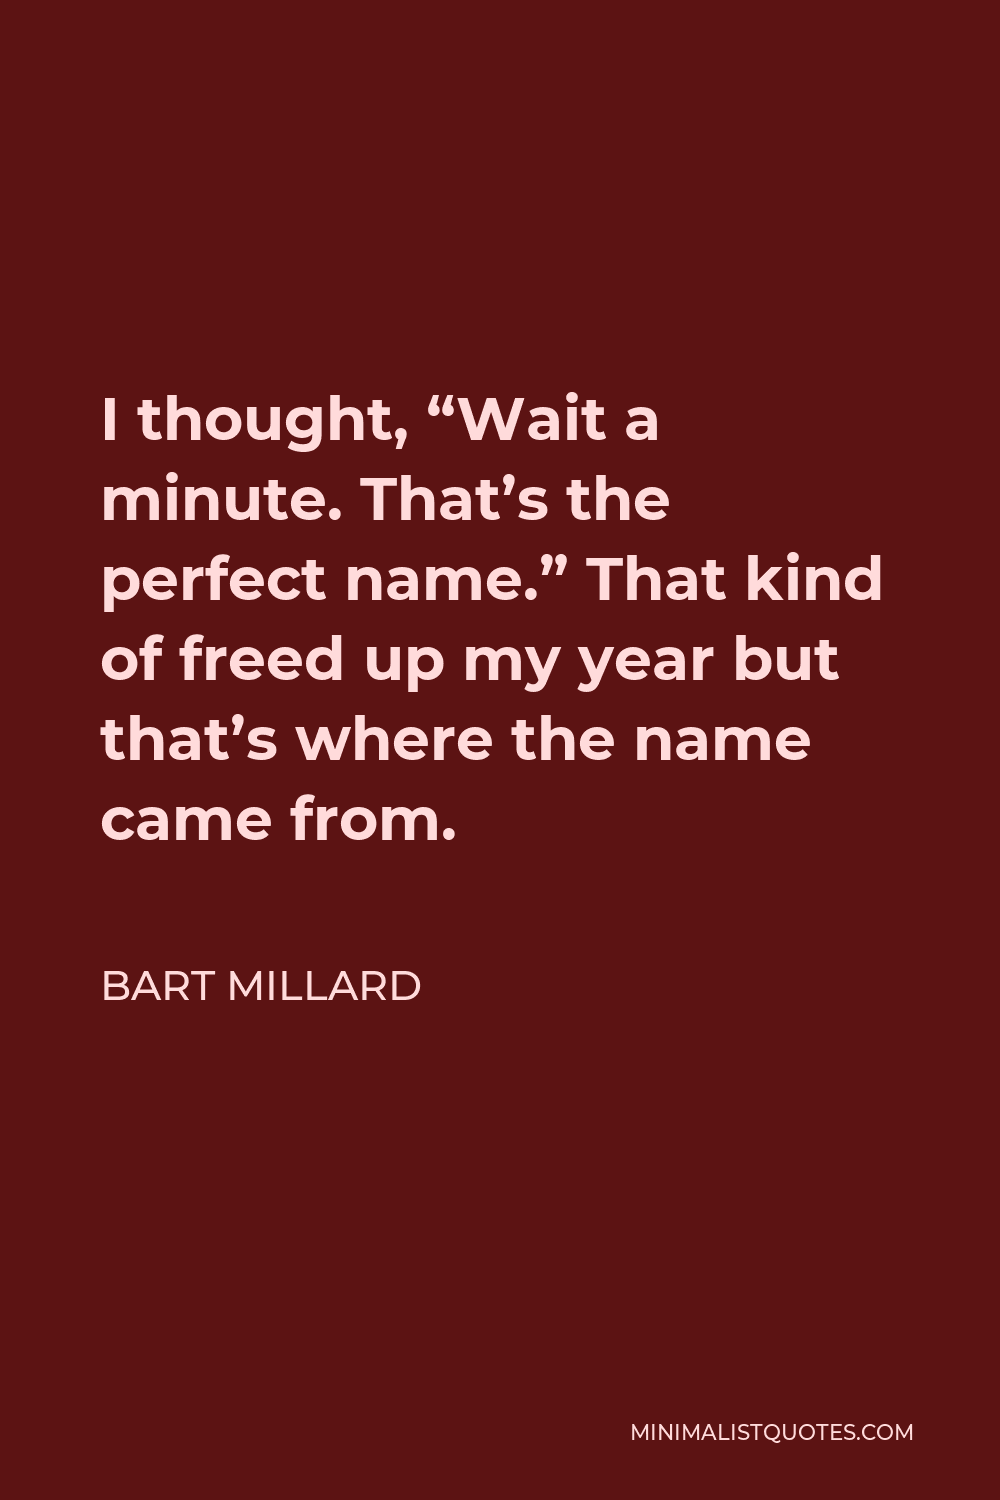 Bart Millard Quote - I thought, “Wait a minute. That’s the perfect name.” That kind of freed up my year but that’s where the name came from.